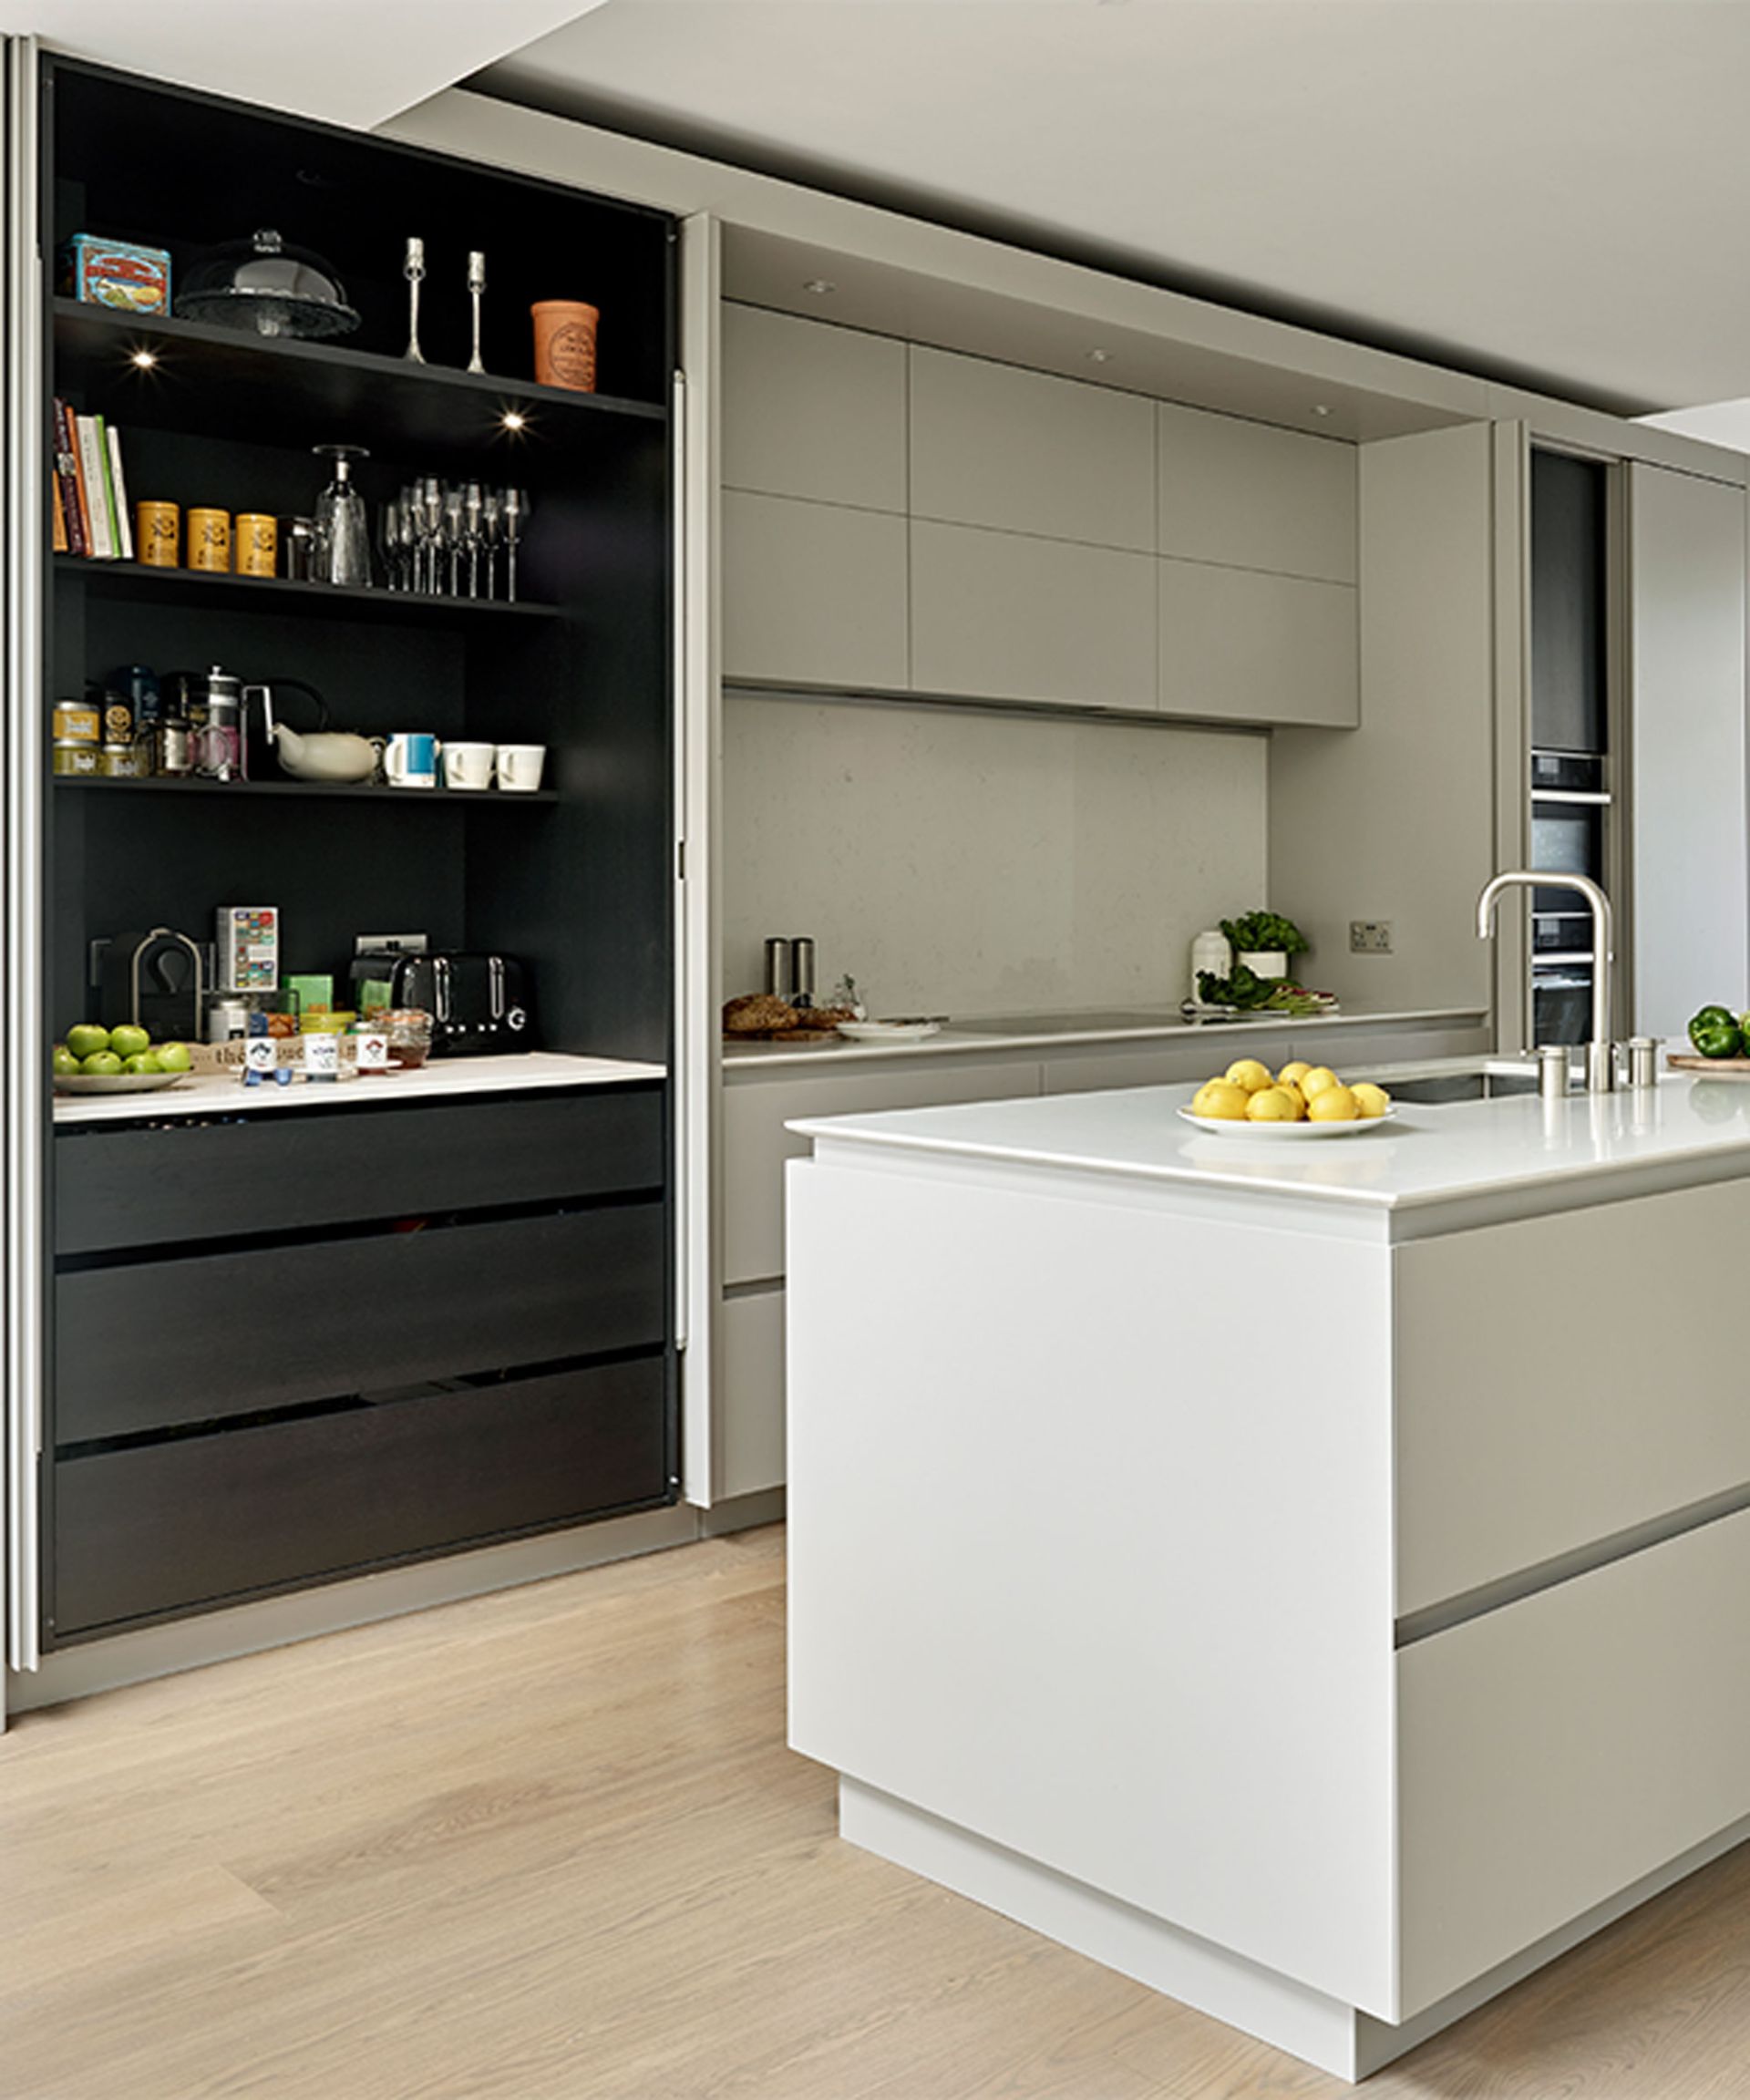 <p>                     Clean lines, clear surfaces and a calm aesthetic are key when it comes to modern kitchen design, so keeping clutter out of sight is a must.                    </p>                                      <p>                     Keeping appliances behind closed doors has long been a way of concealing those less-than-lovely items, such as dishwashers, refrigerators and washing machines in integrated cabinets. Breakfast stations are the latest modern kitchen concept that sees tea, coffee and toast-making essentials tucked tidily away into one zone.                    </p>                                      <p>                     A clever way of keeping must have items organised and in one place, pocket doors or bi folds neatly tuck out of the way for easy access when in use and then close and conceal the contents when breakfast is over.                   </p>                                      <p>                     ‘In the flurry of action in the mornings before work and school, it makes complete sense to have your favourite breakfast items organised and in one place to get the day off to an ordered, easy start,’ says Tom Howley, director of Tom Howley.                   </p>